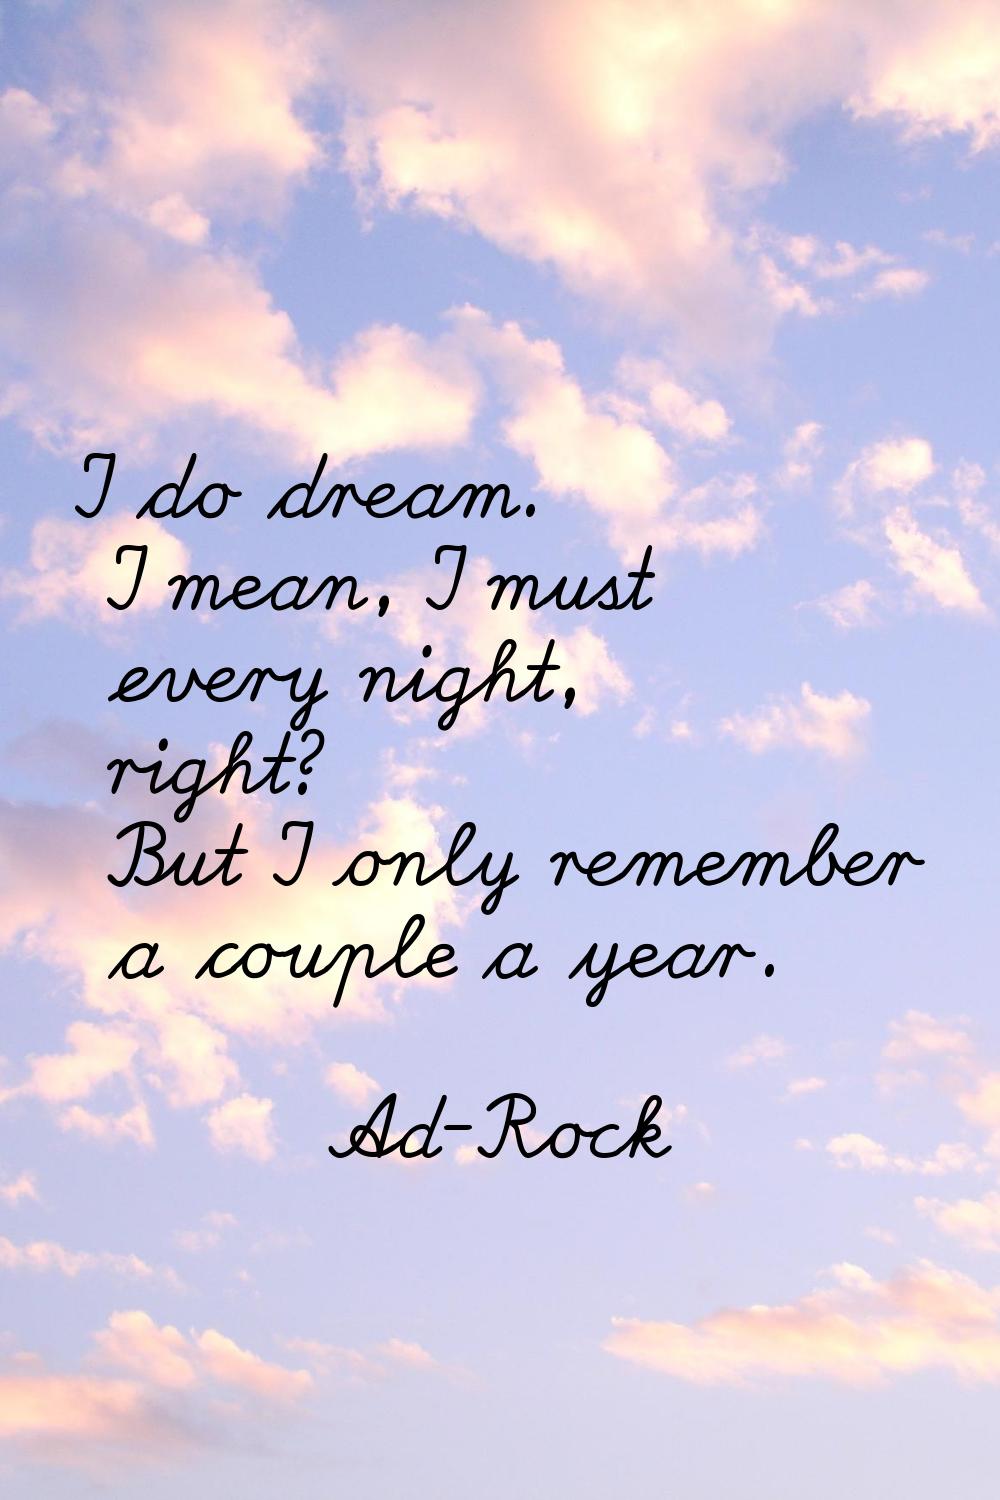 I do dream. I mean, I must every night, right? But I only remember a couple a year.